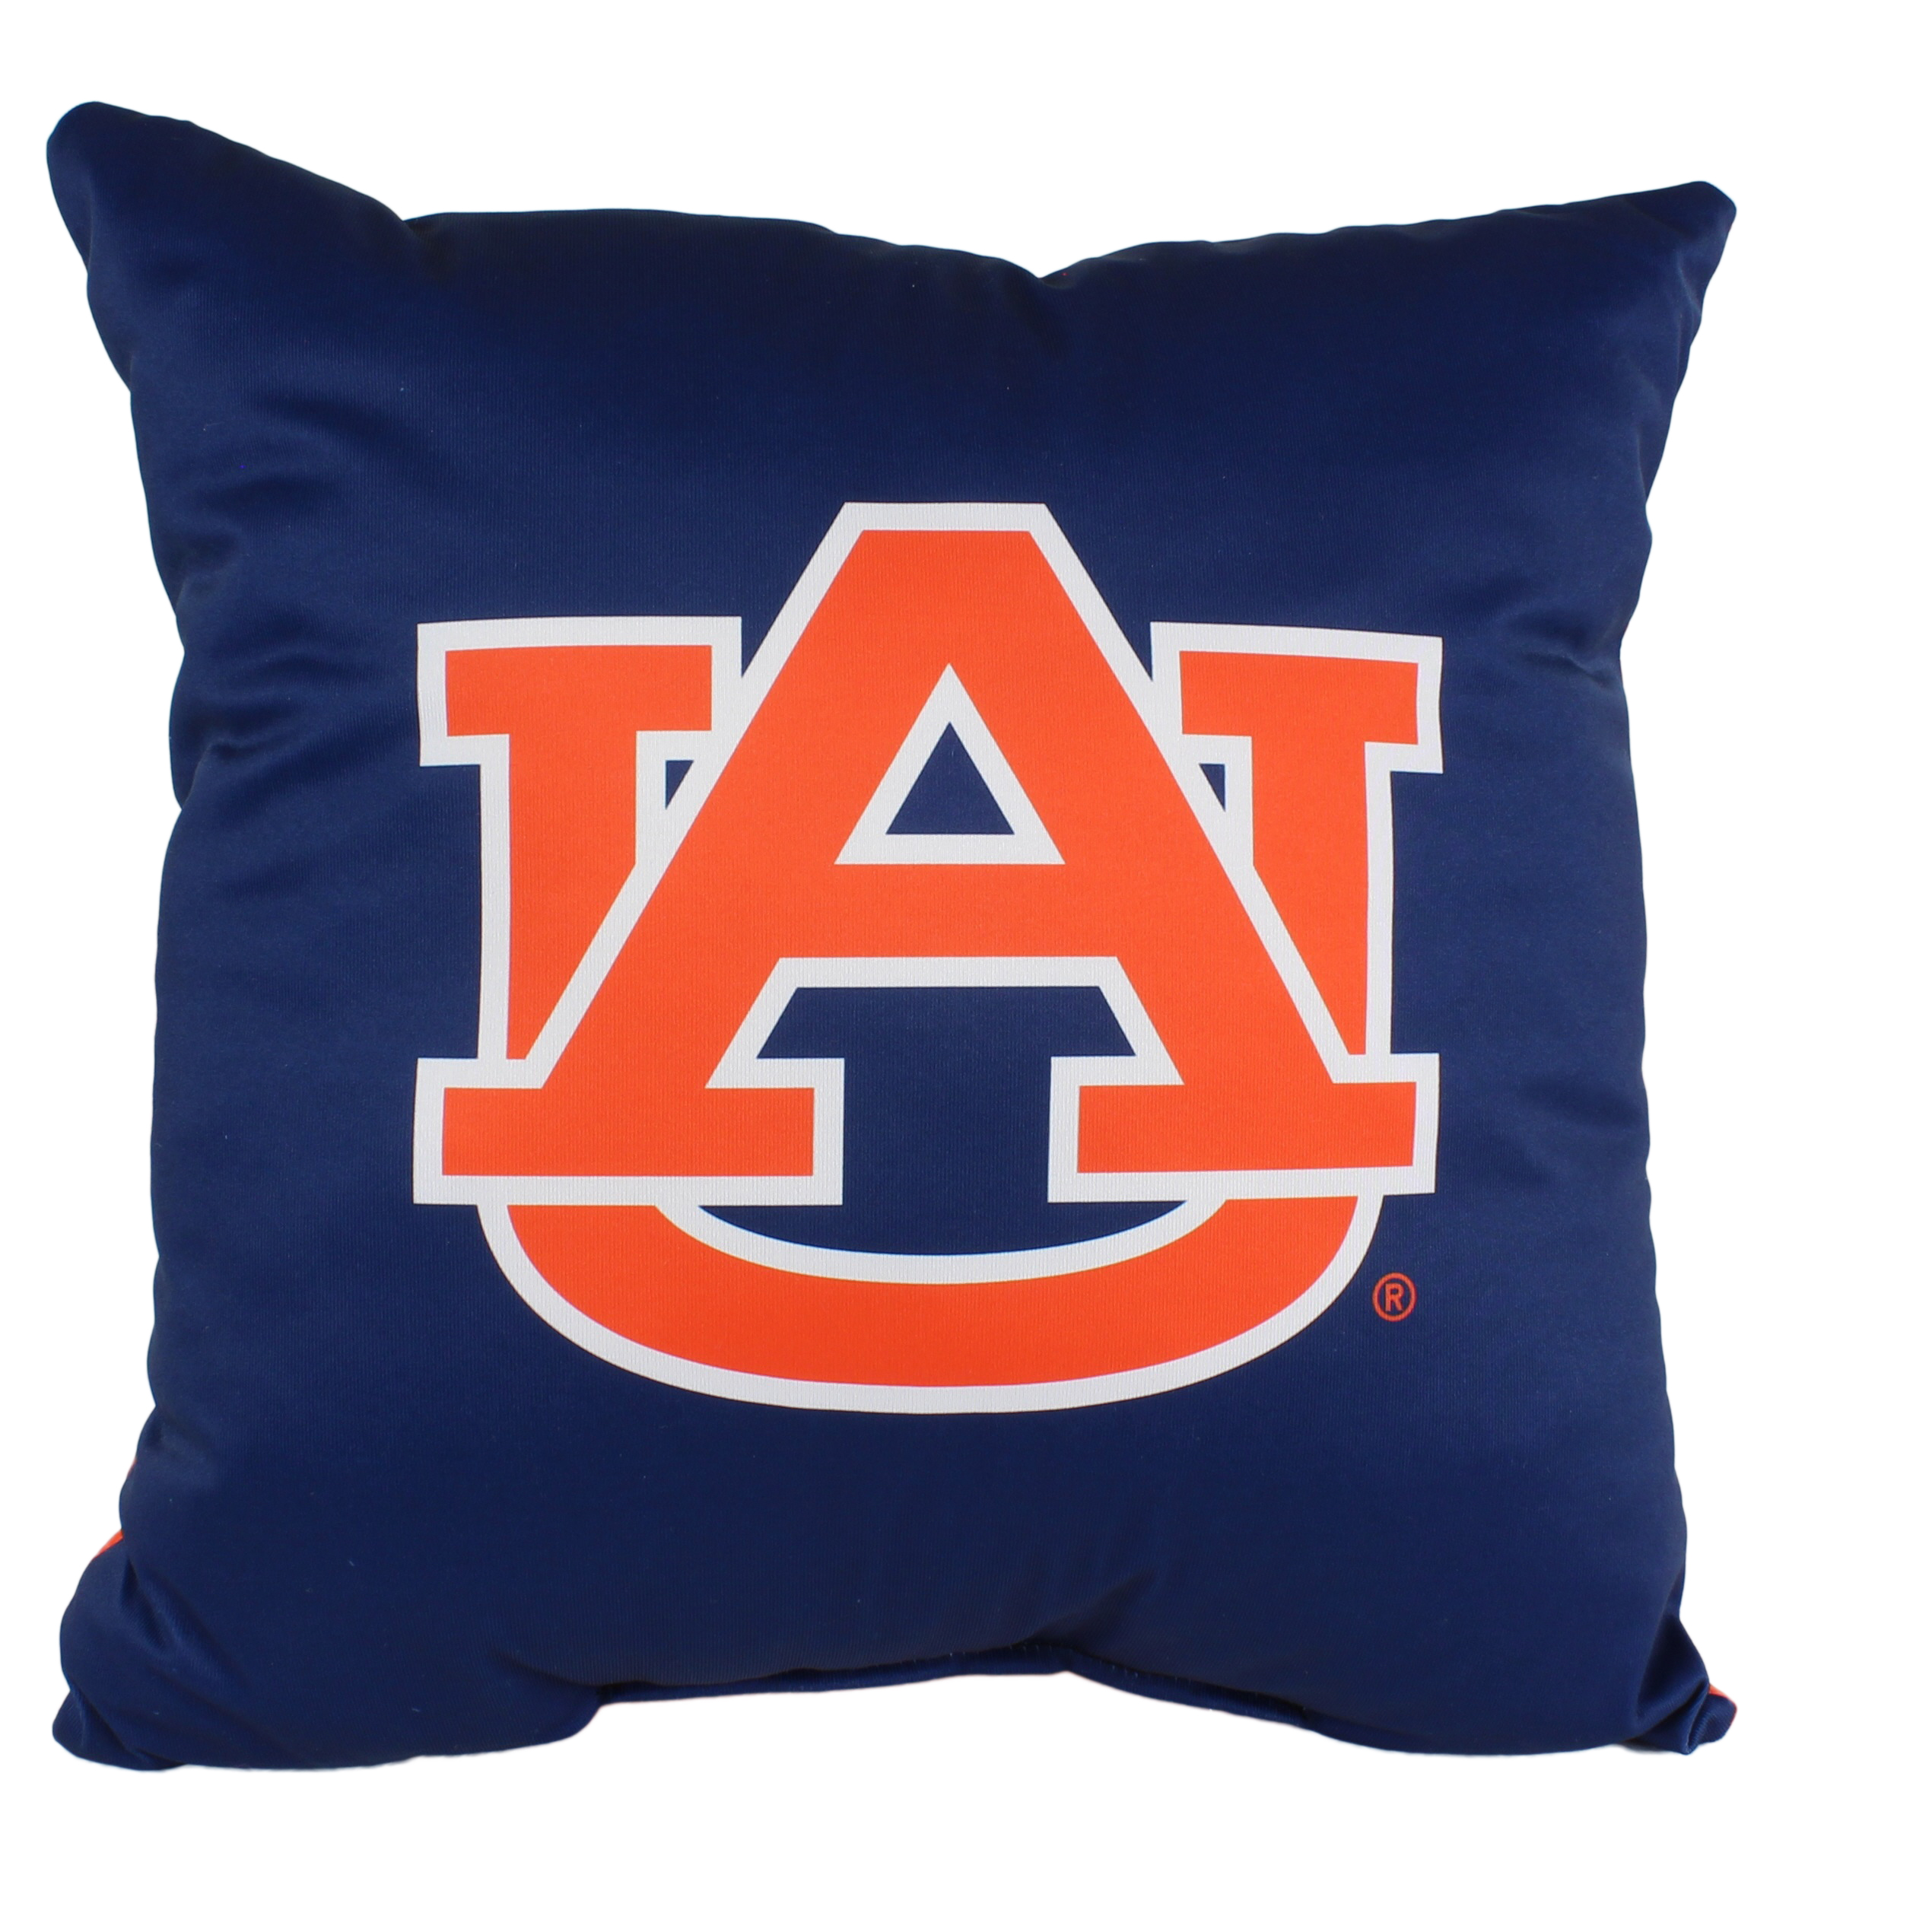 Boise State Broncos 16 inch Reversible Decorative Pillow - image 1 of 4